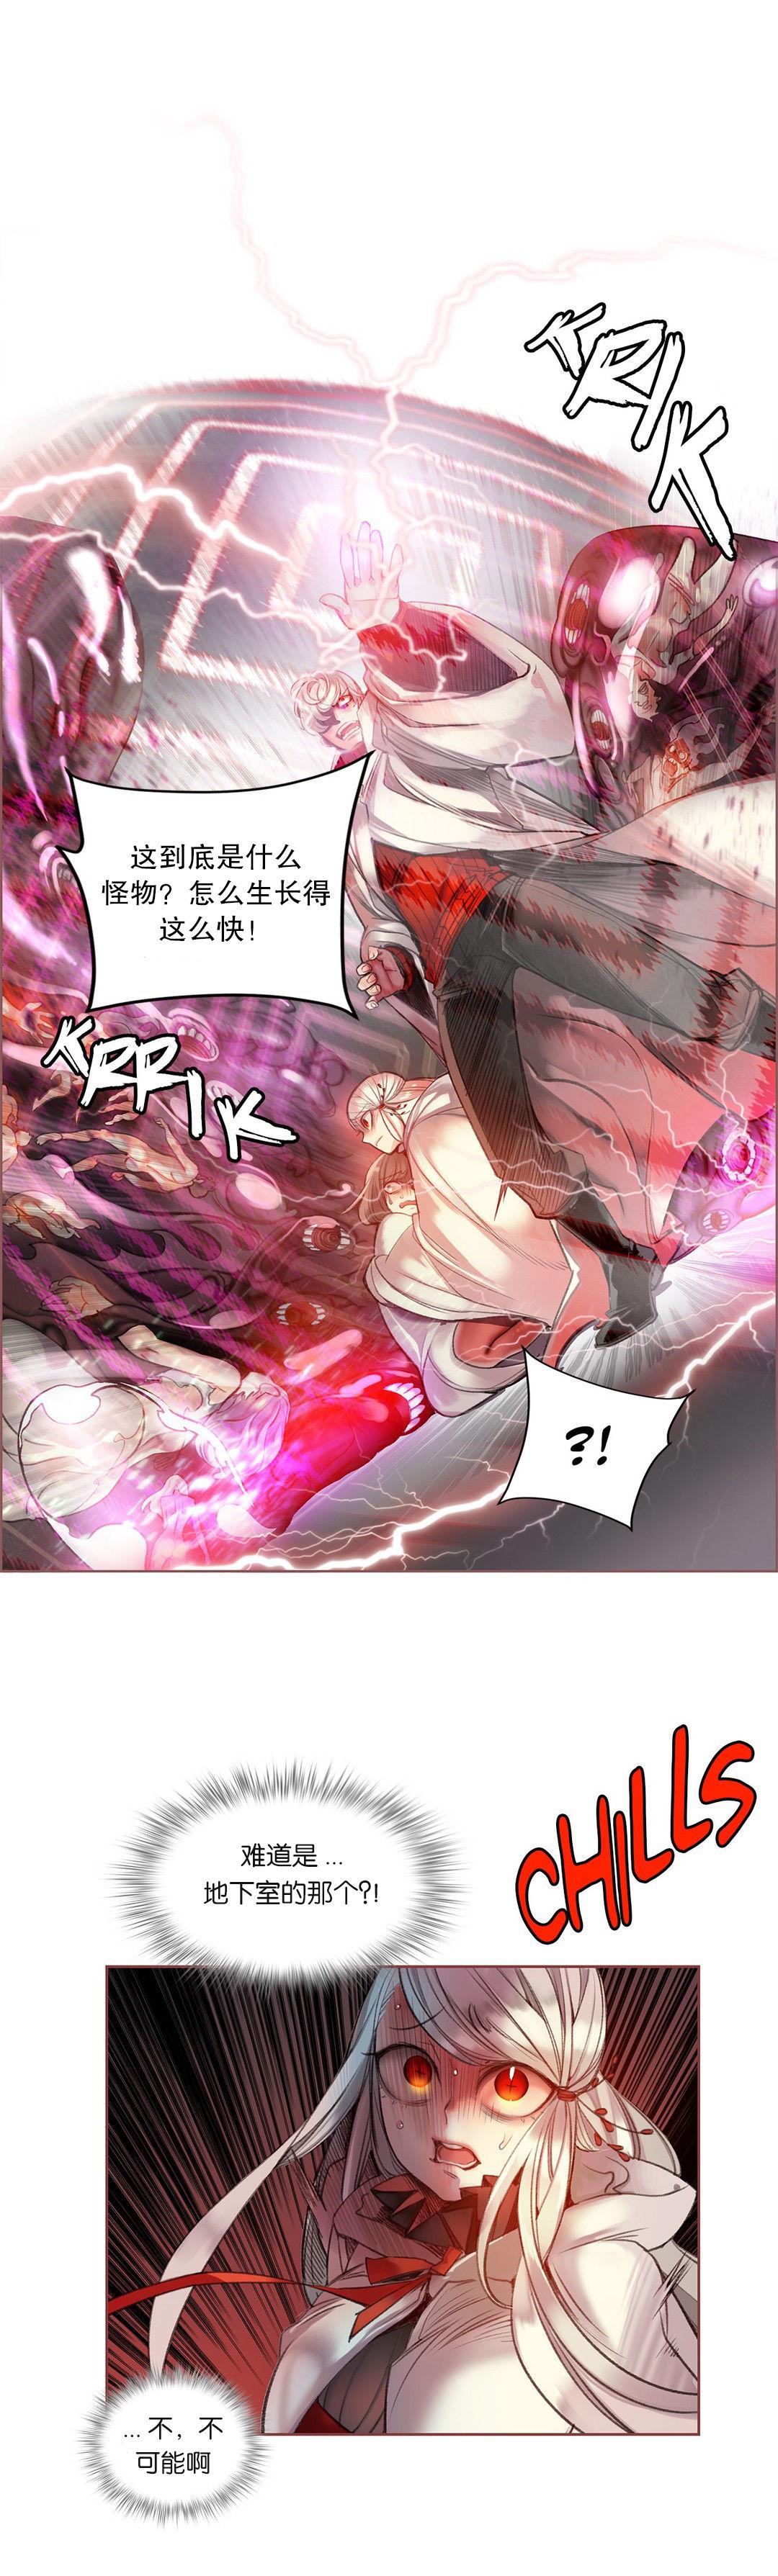 [Juder] Lilith`s Cord (第二季) Ch.61-66 [Chinese] [aaatwist个人汉化] [Ongoing] 20